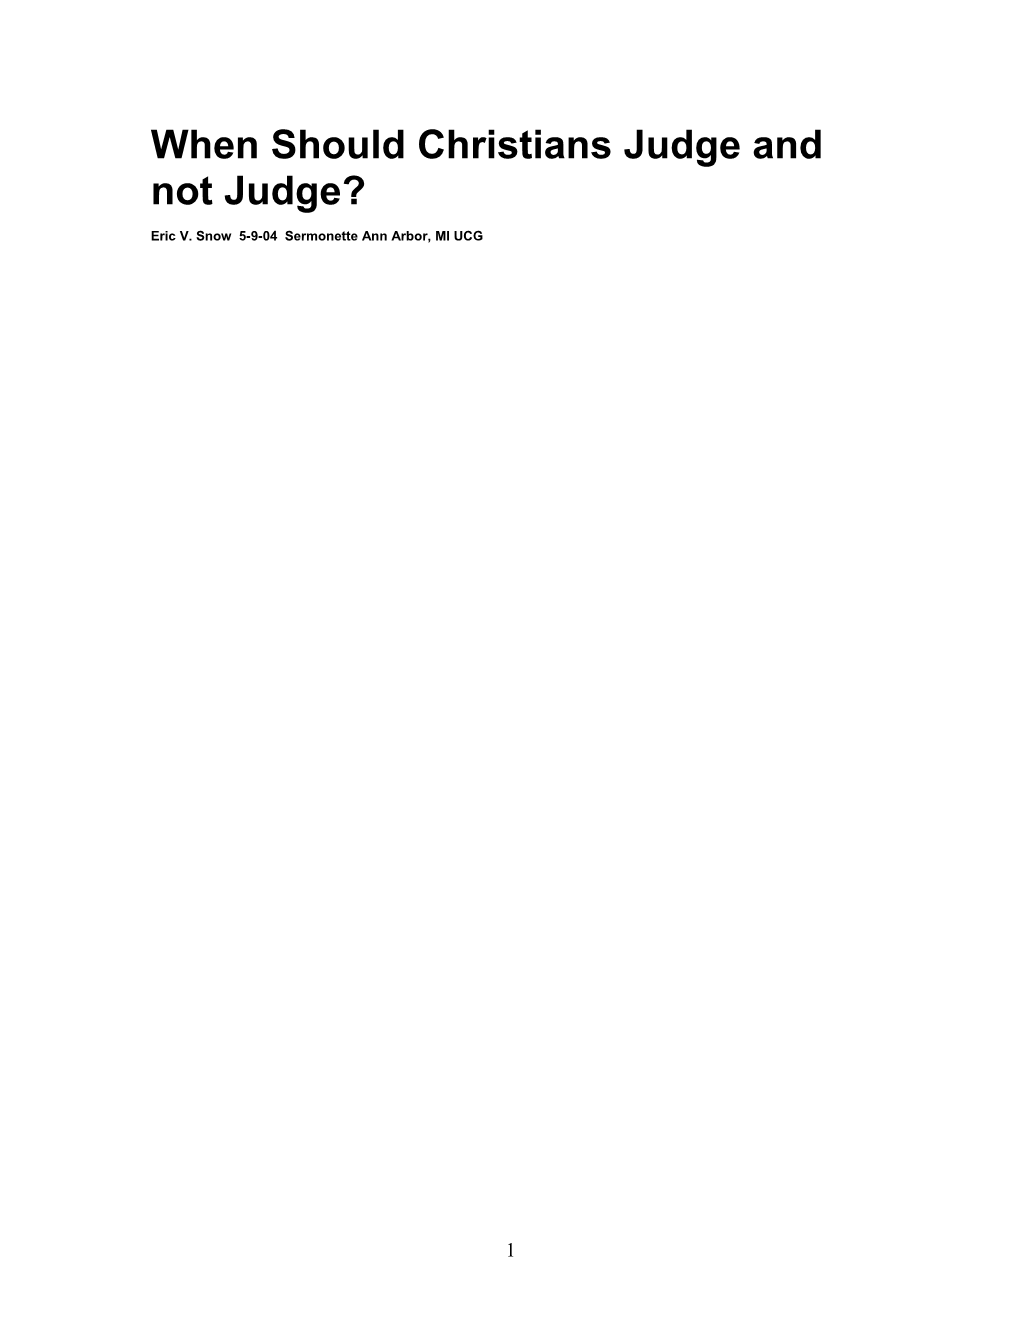 When Should Christians Judge and Not Judge